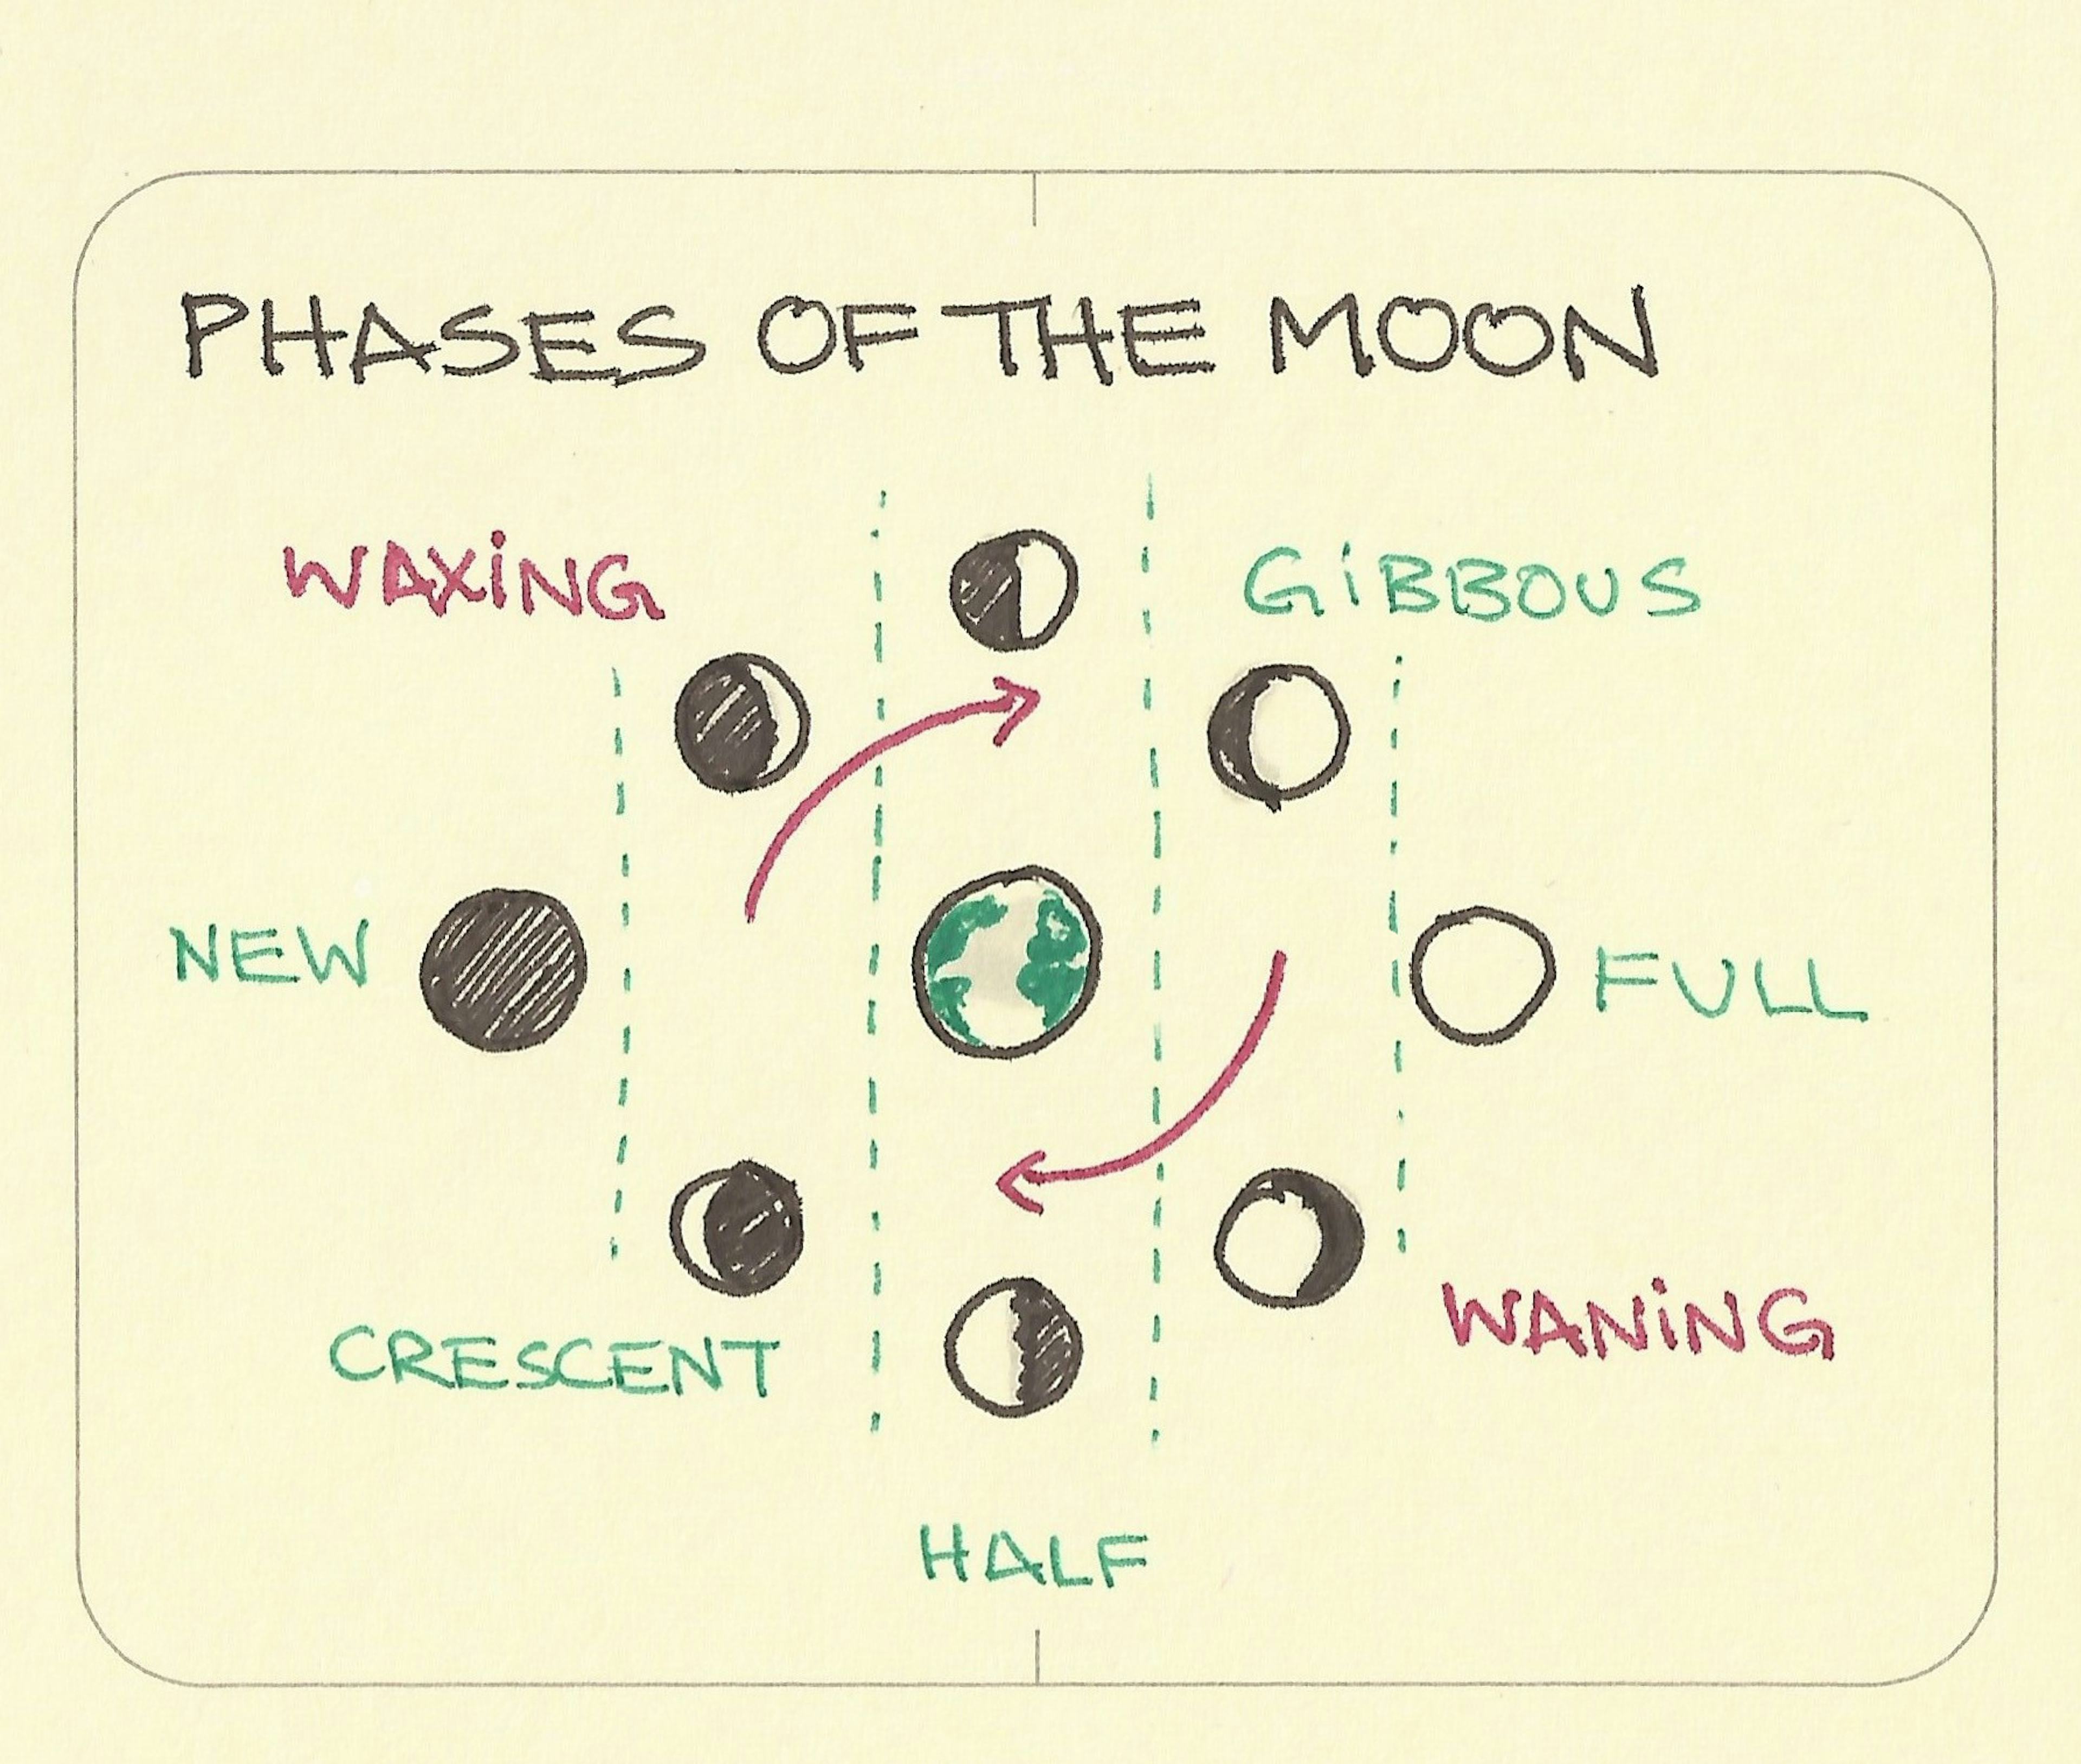 Phases of the moon - Sketchplanations